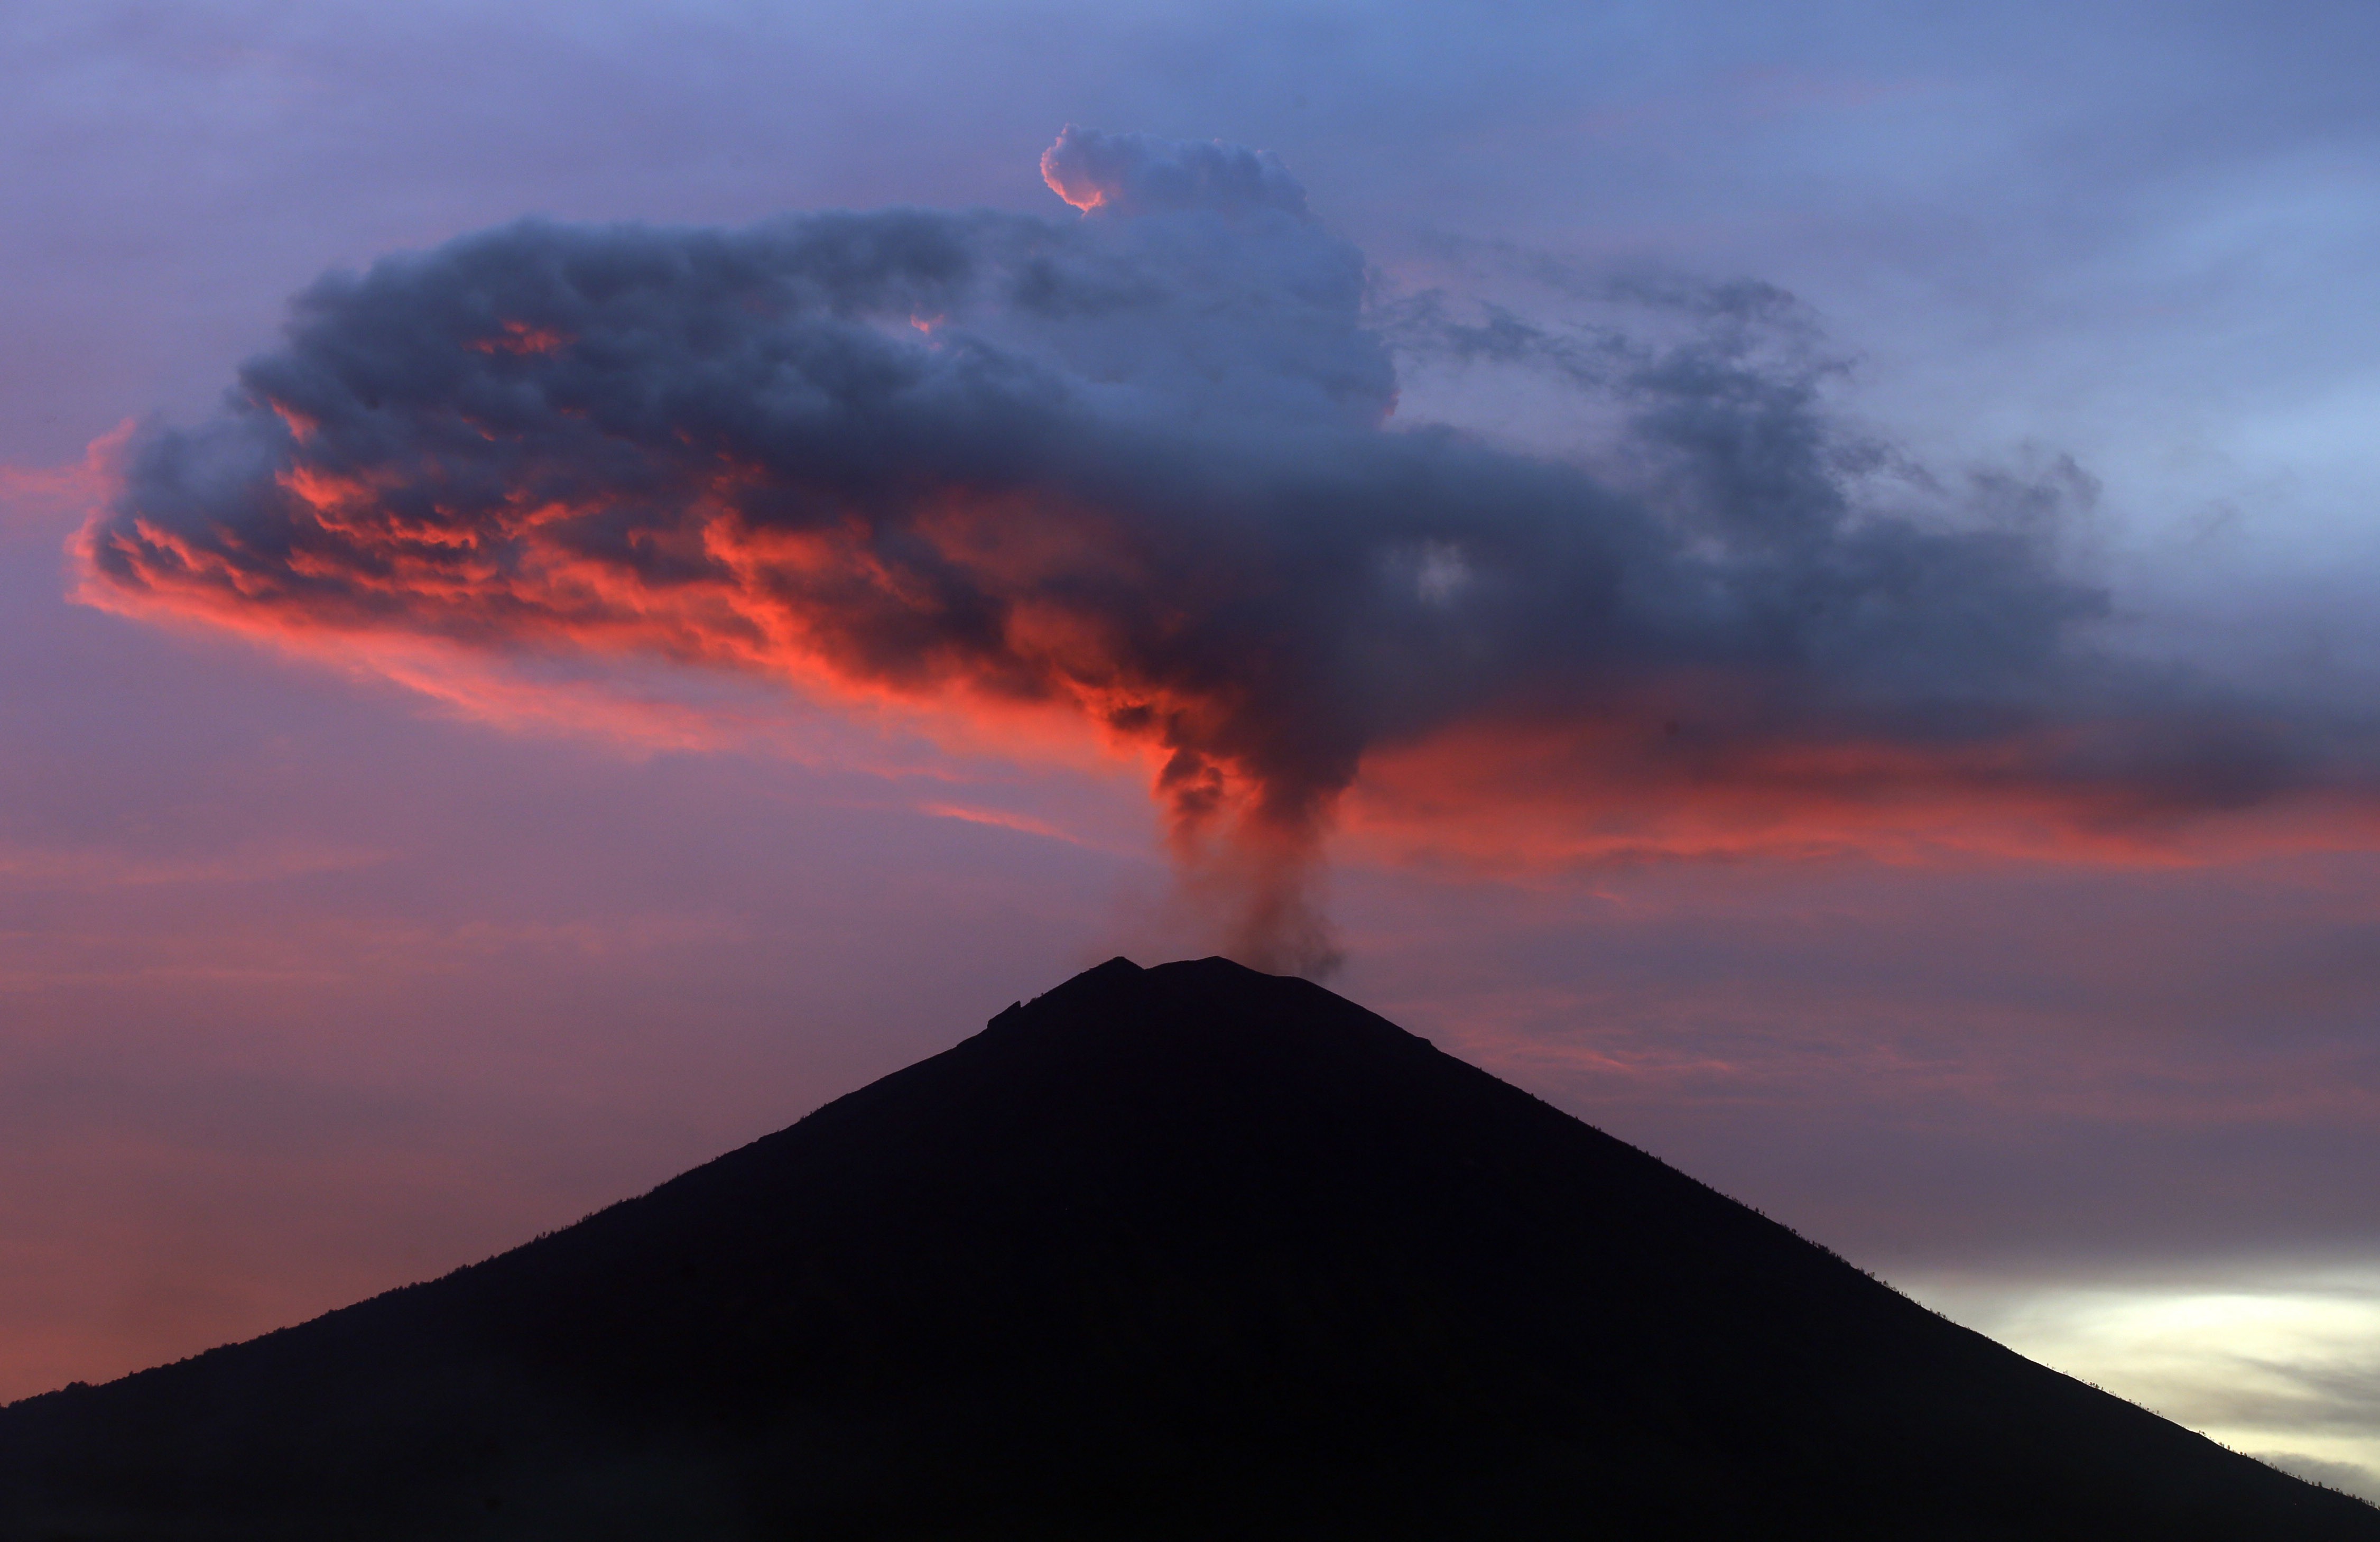 Though it has yet to yield a major eruption, Mount Agung still has tens of thousands displaced and is scaring away visitors who fear getting stuck by flight cancellations after their end-of-the-year celebrations